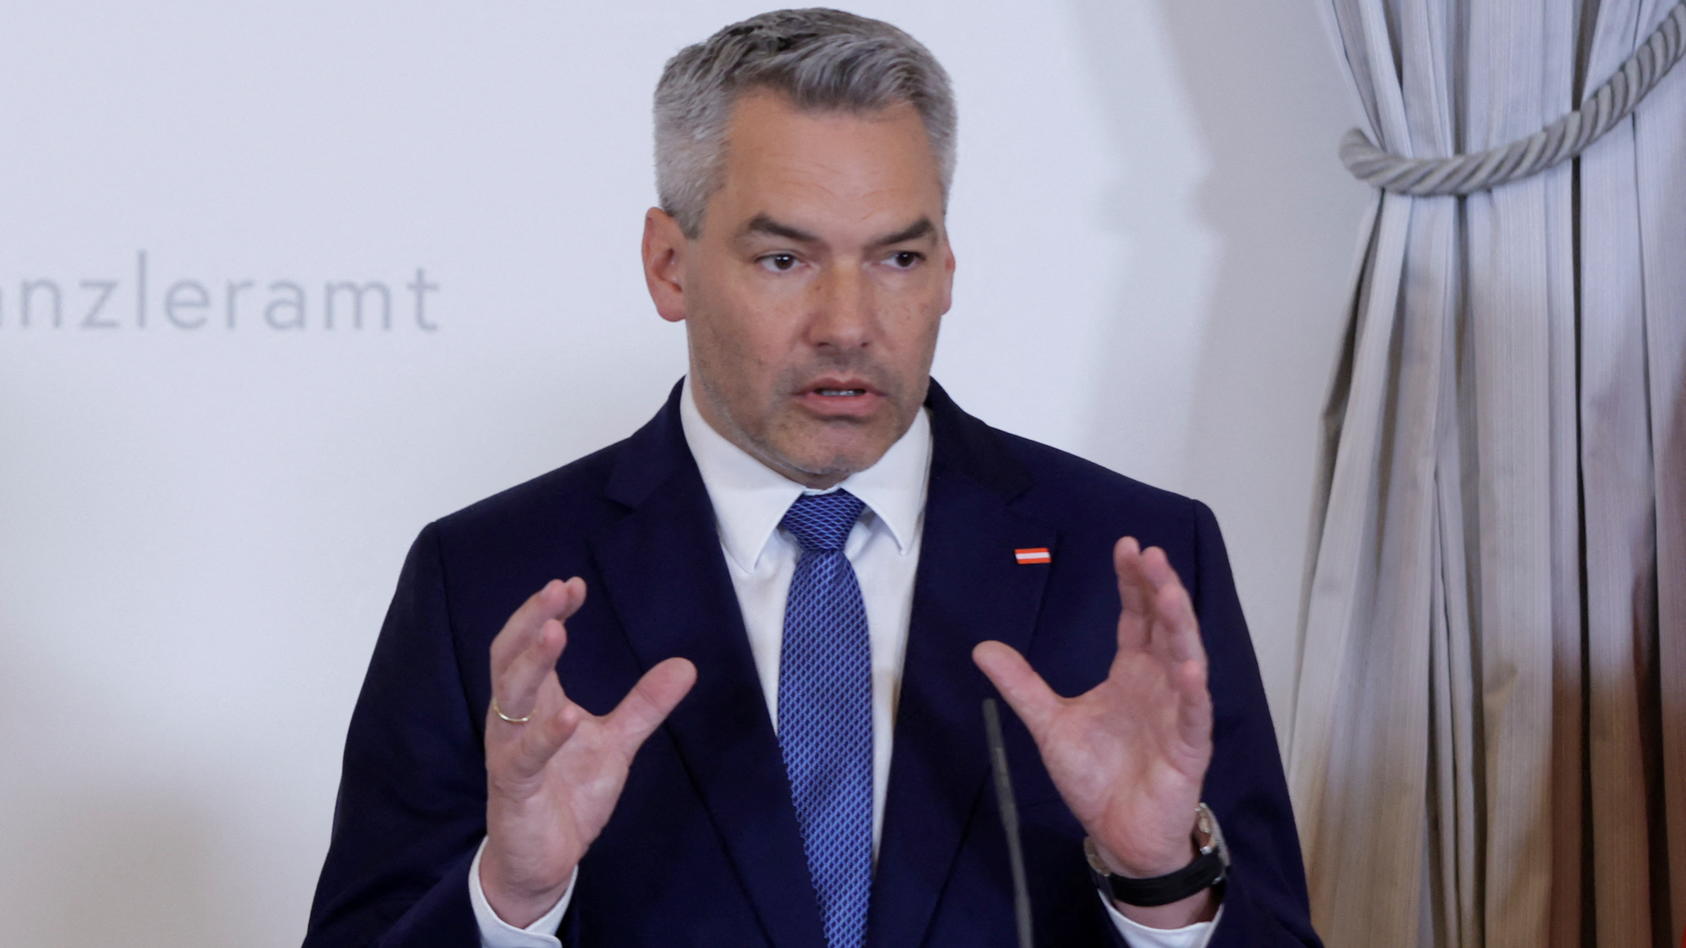 austrian-chancellor-nehammer-attends-a-news-conference-in-vienna